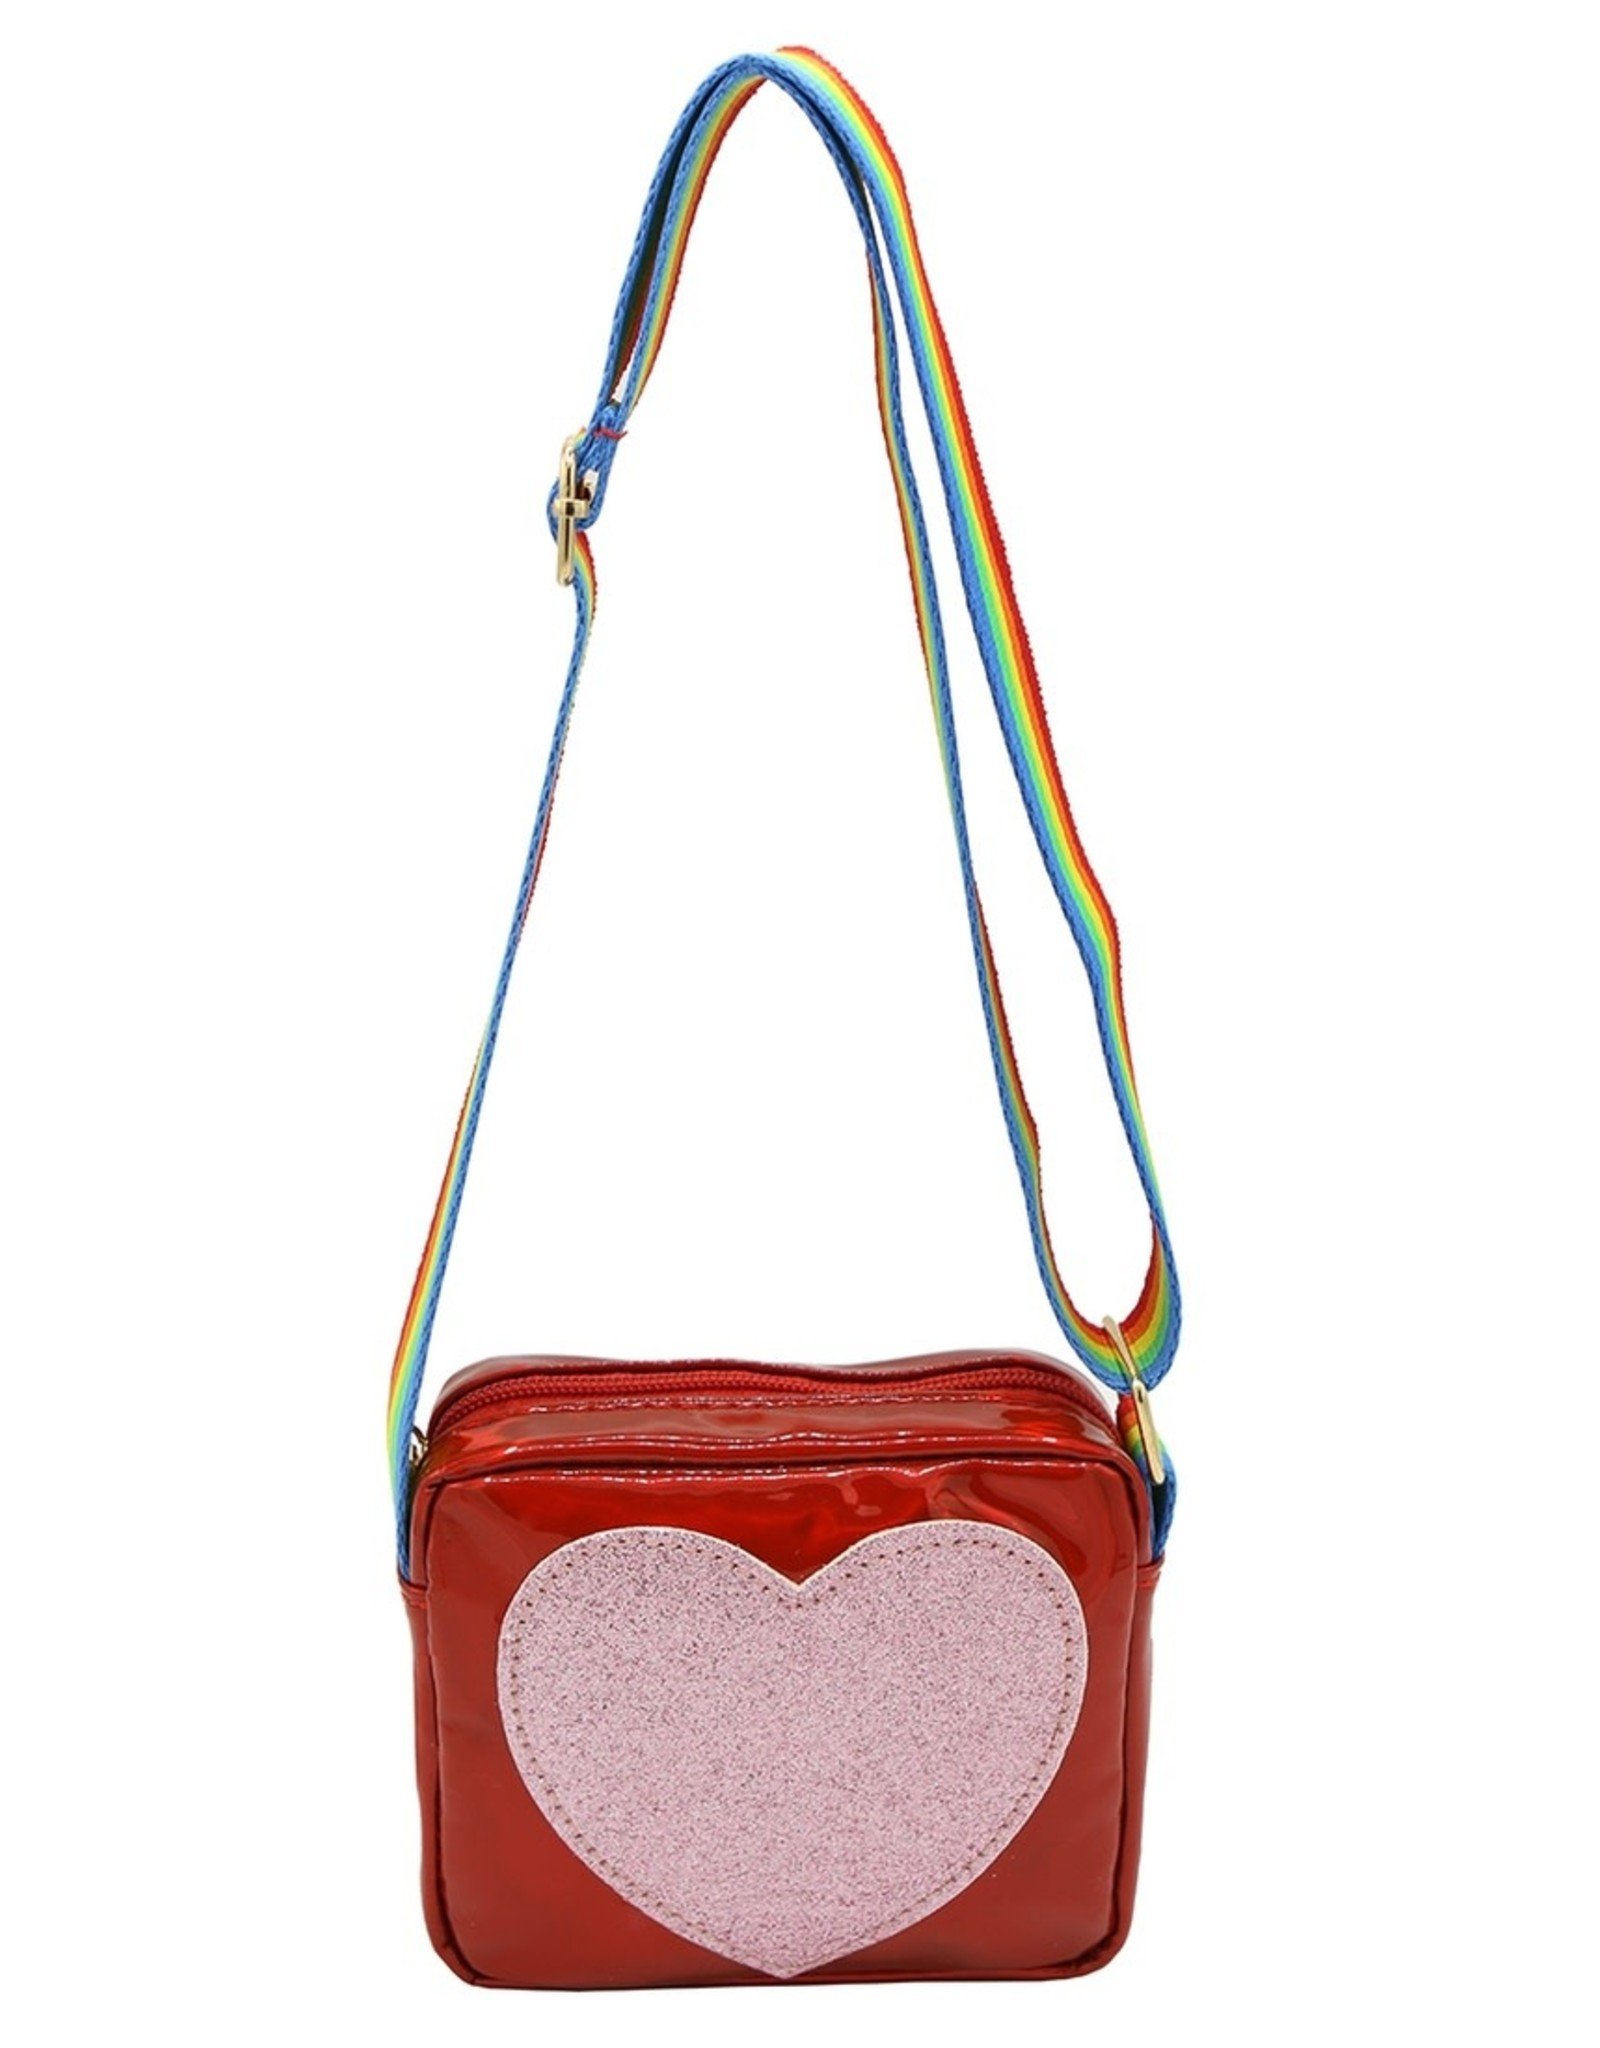 Red Heart Purse with Rainbow Strap